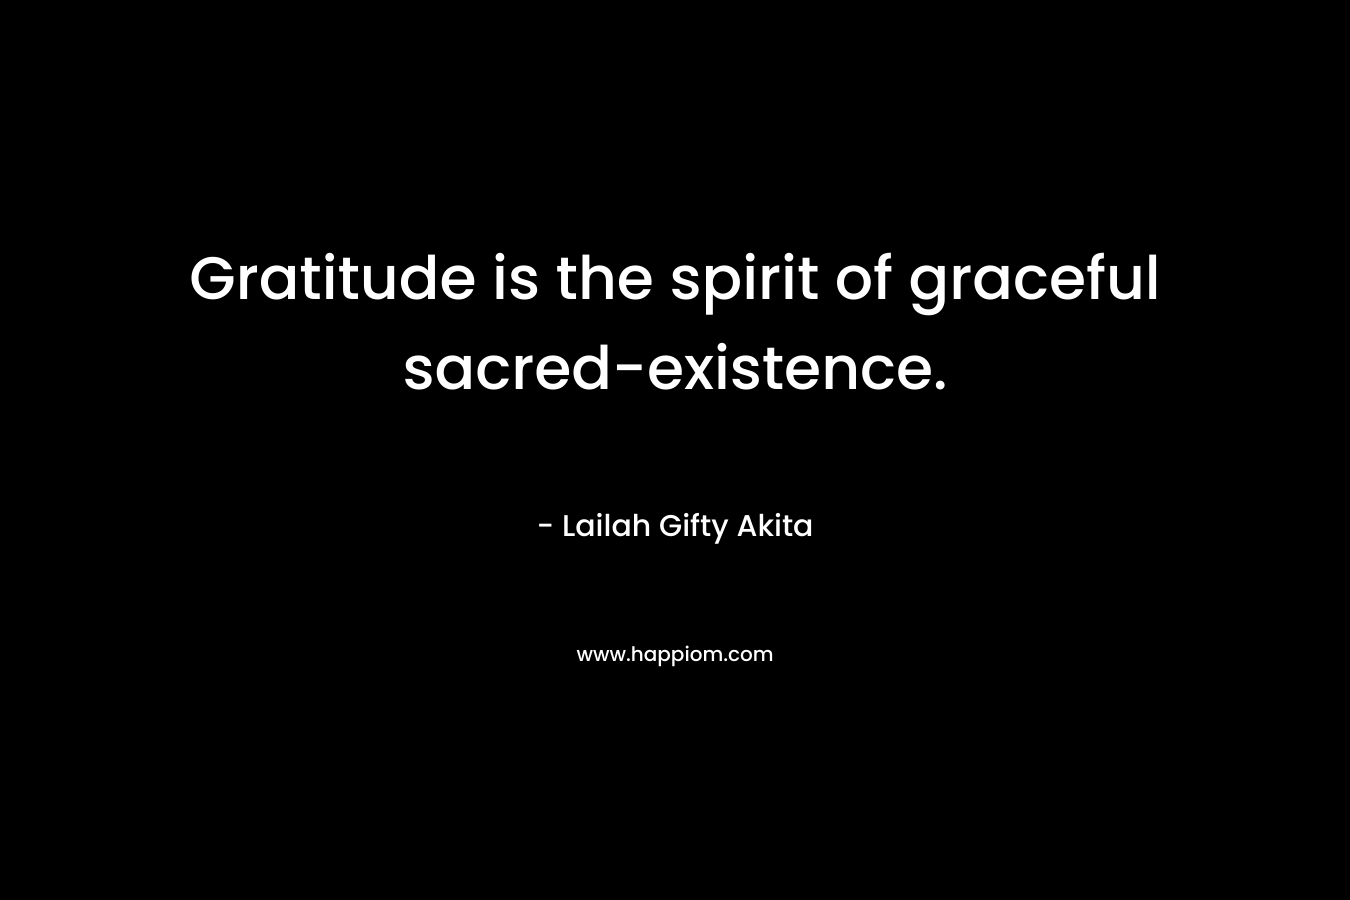 Gratitude is the spirit of graceful sacred-existence.